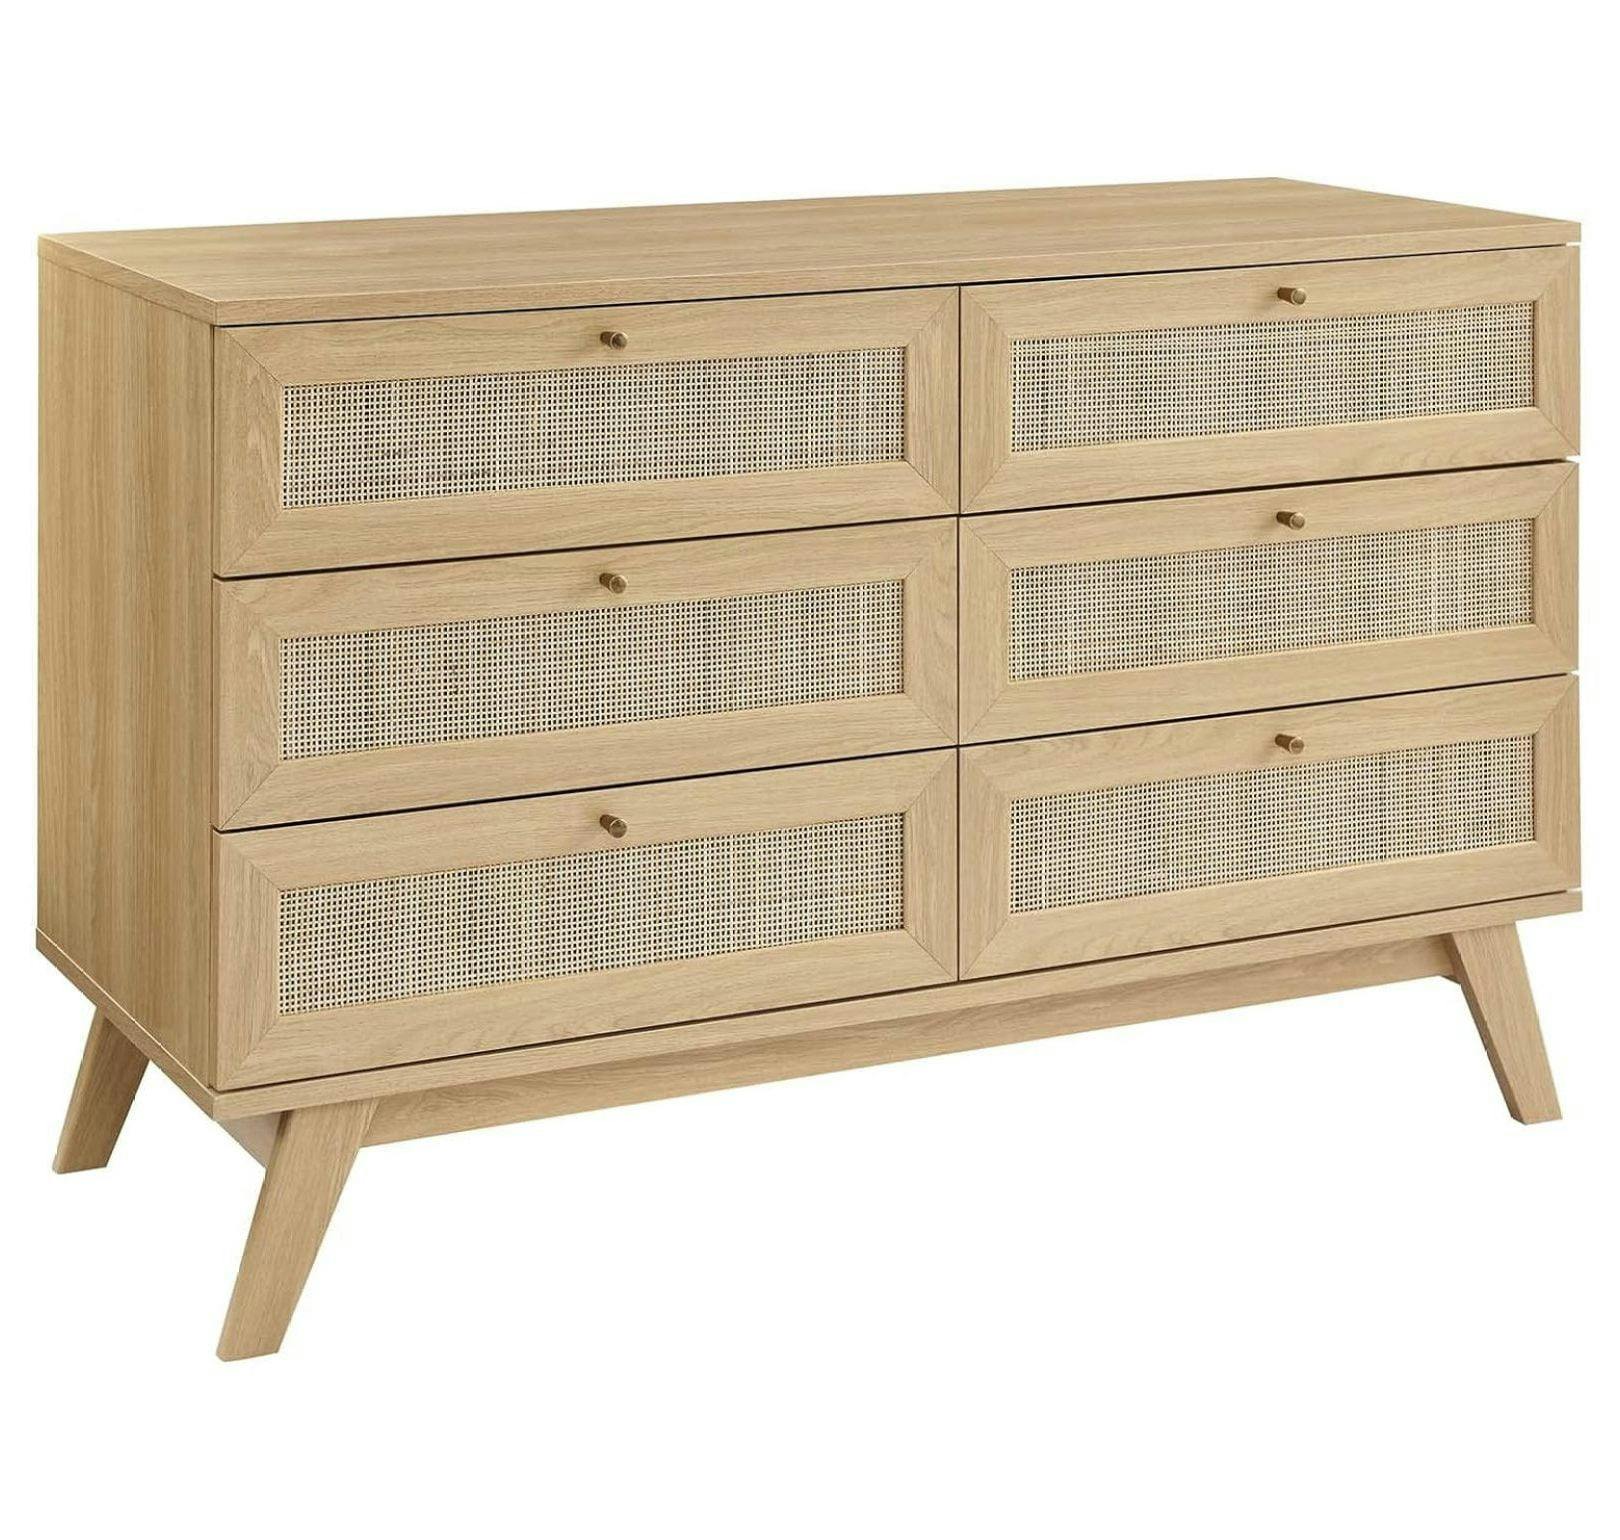 Soma 6-Drawer Double Dresser with Rattan Weave - Oak